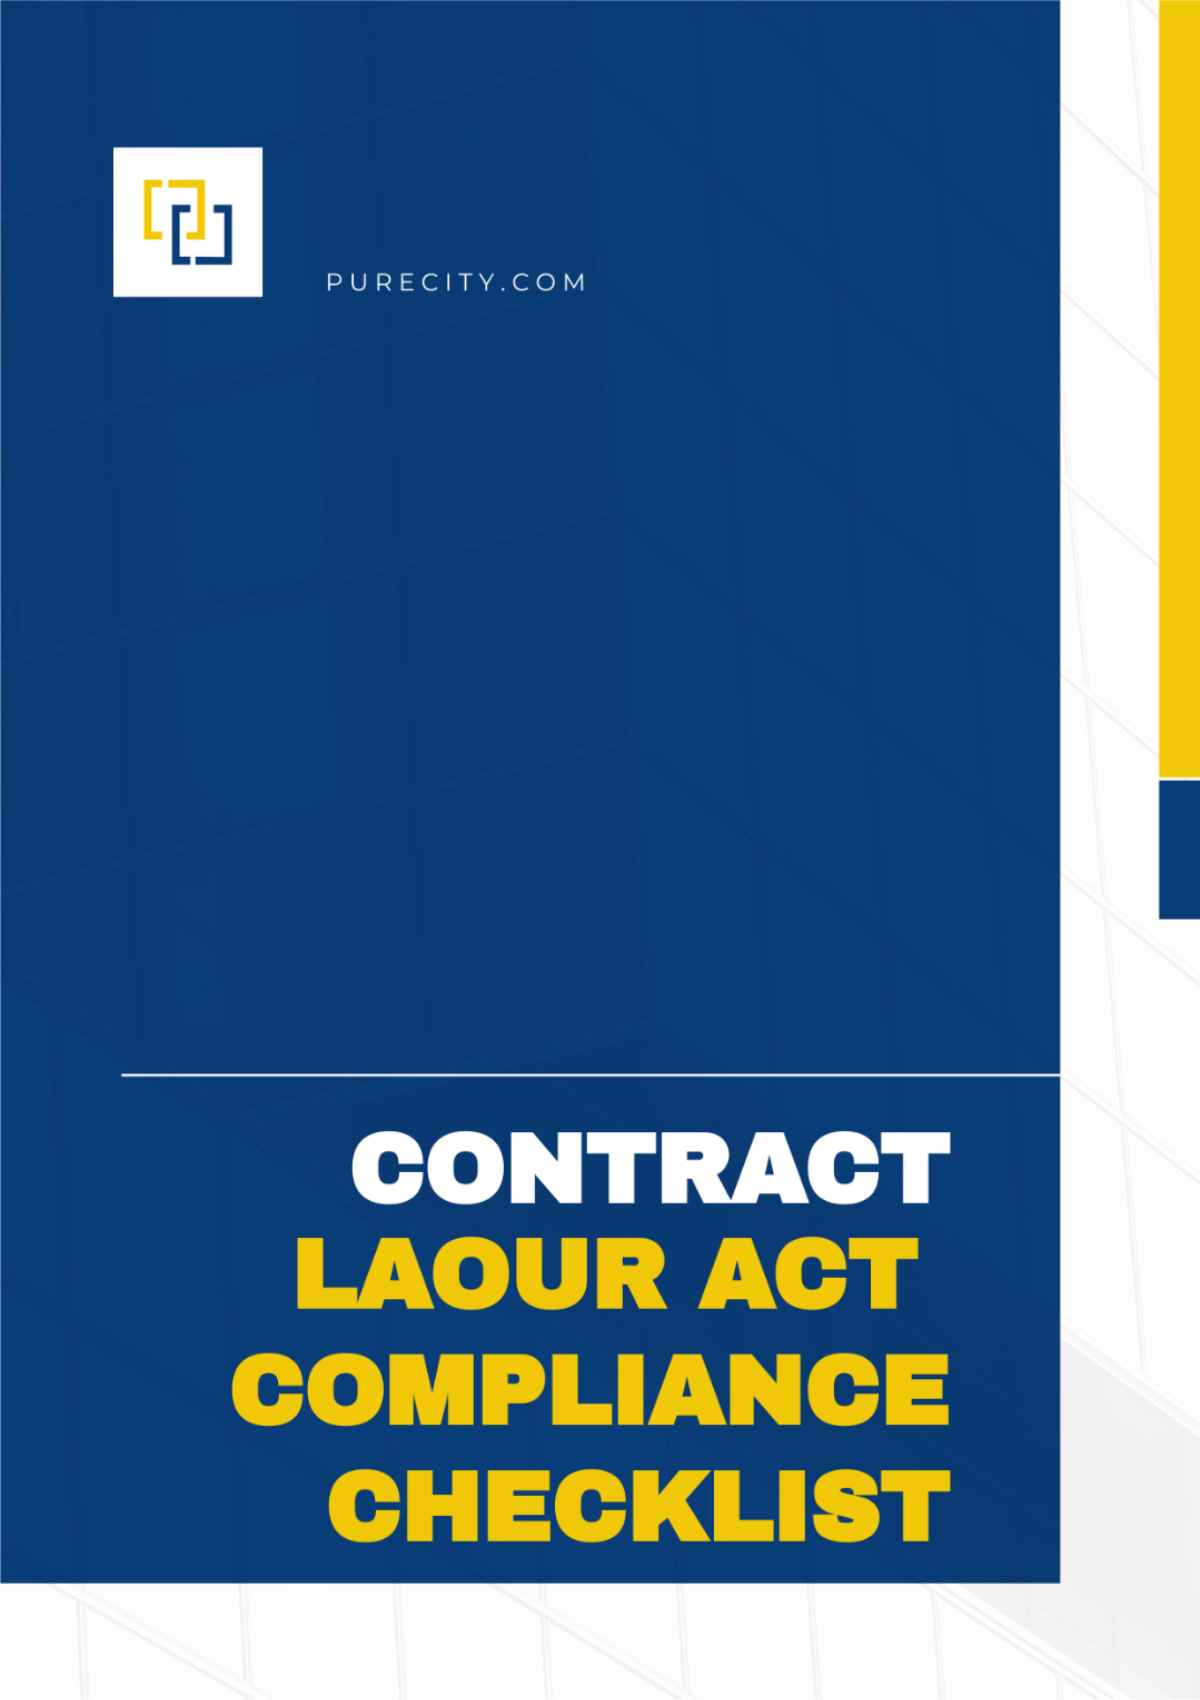 Contract Labour Act Compliance Checklist Template